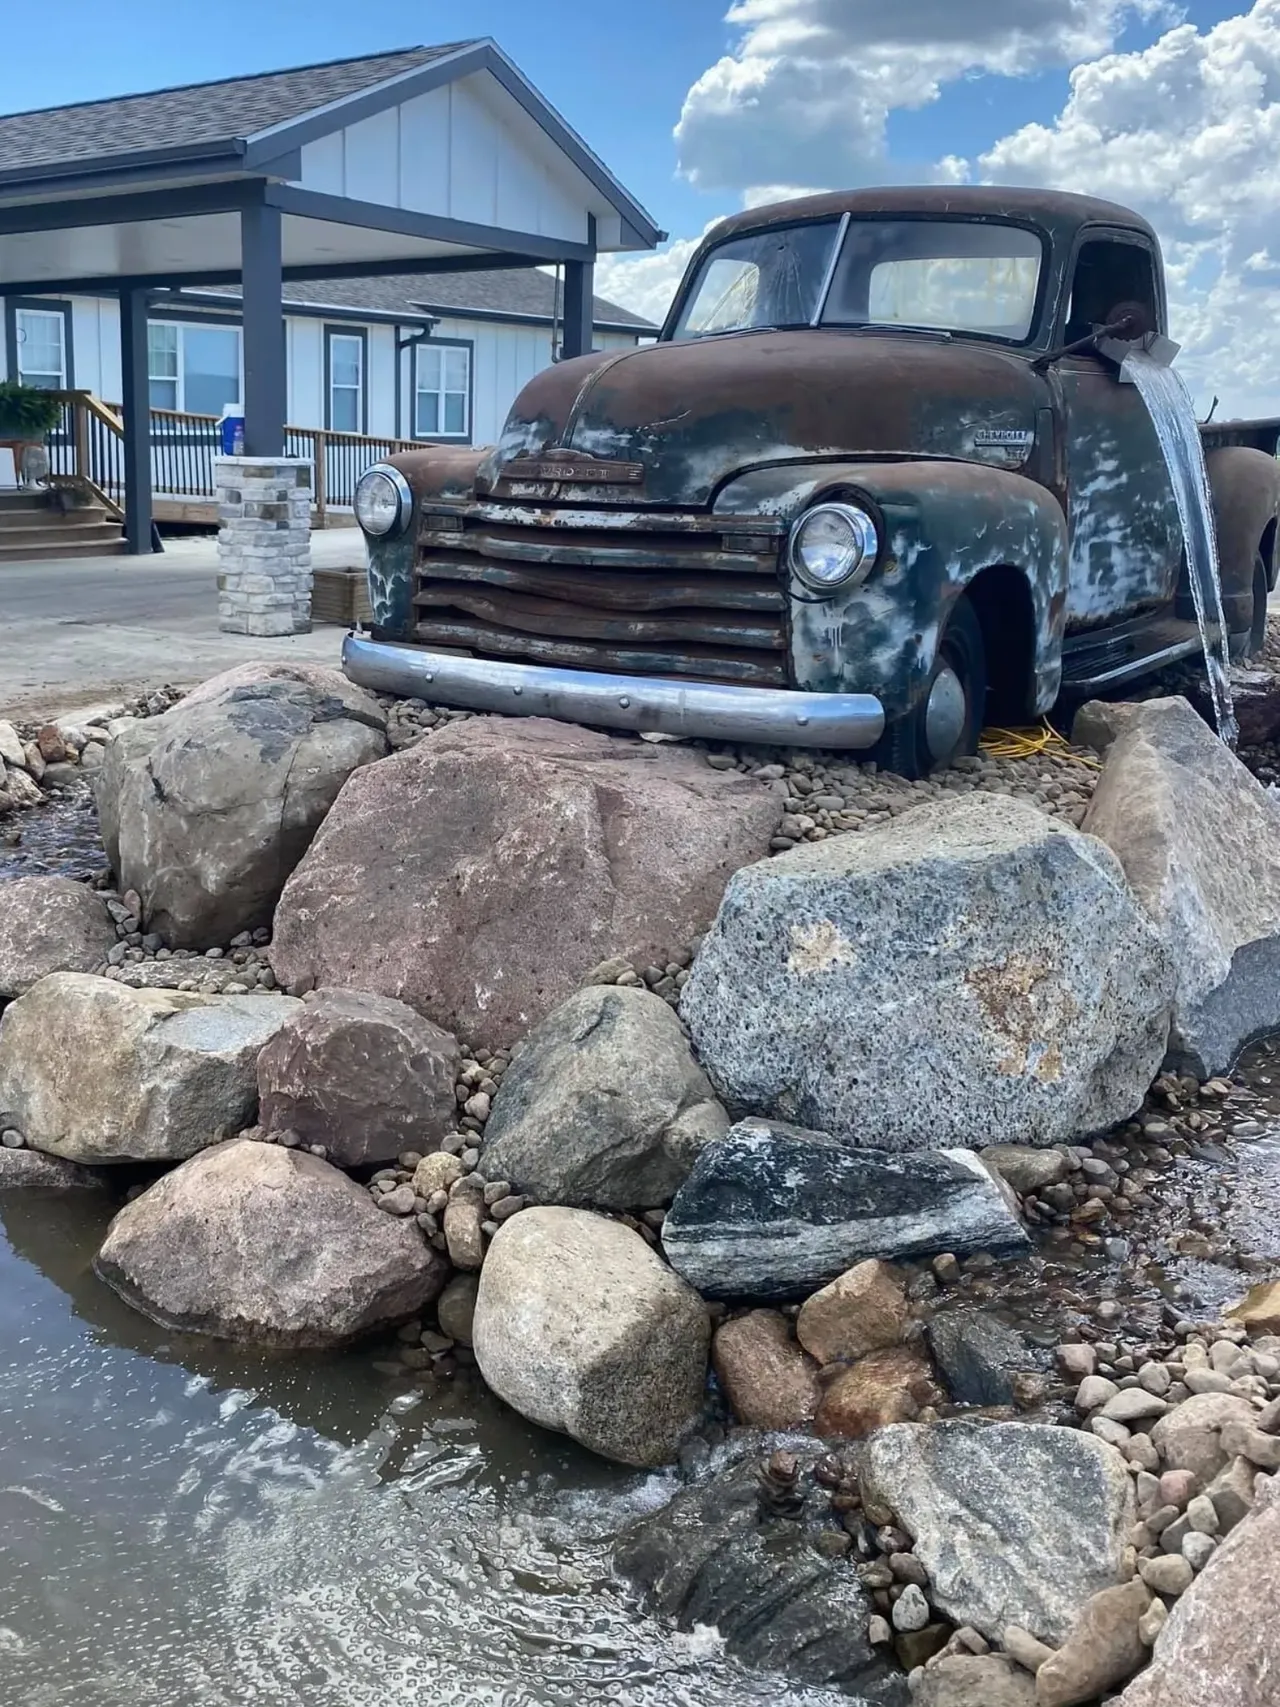 A truck is parked on some rocks near water.